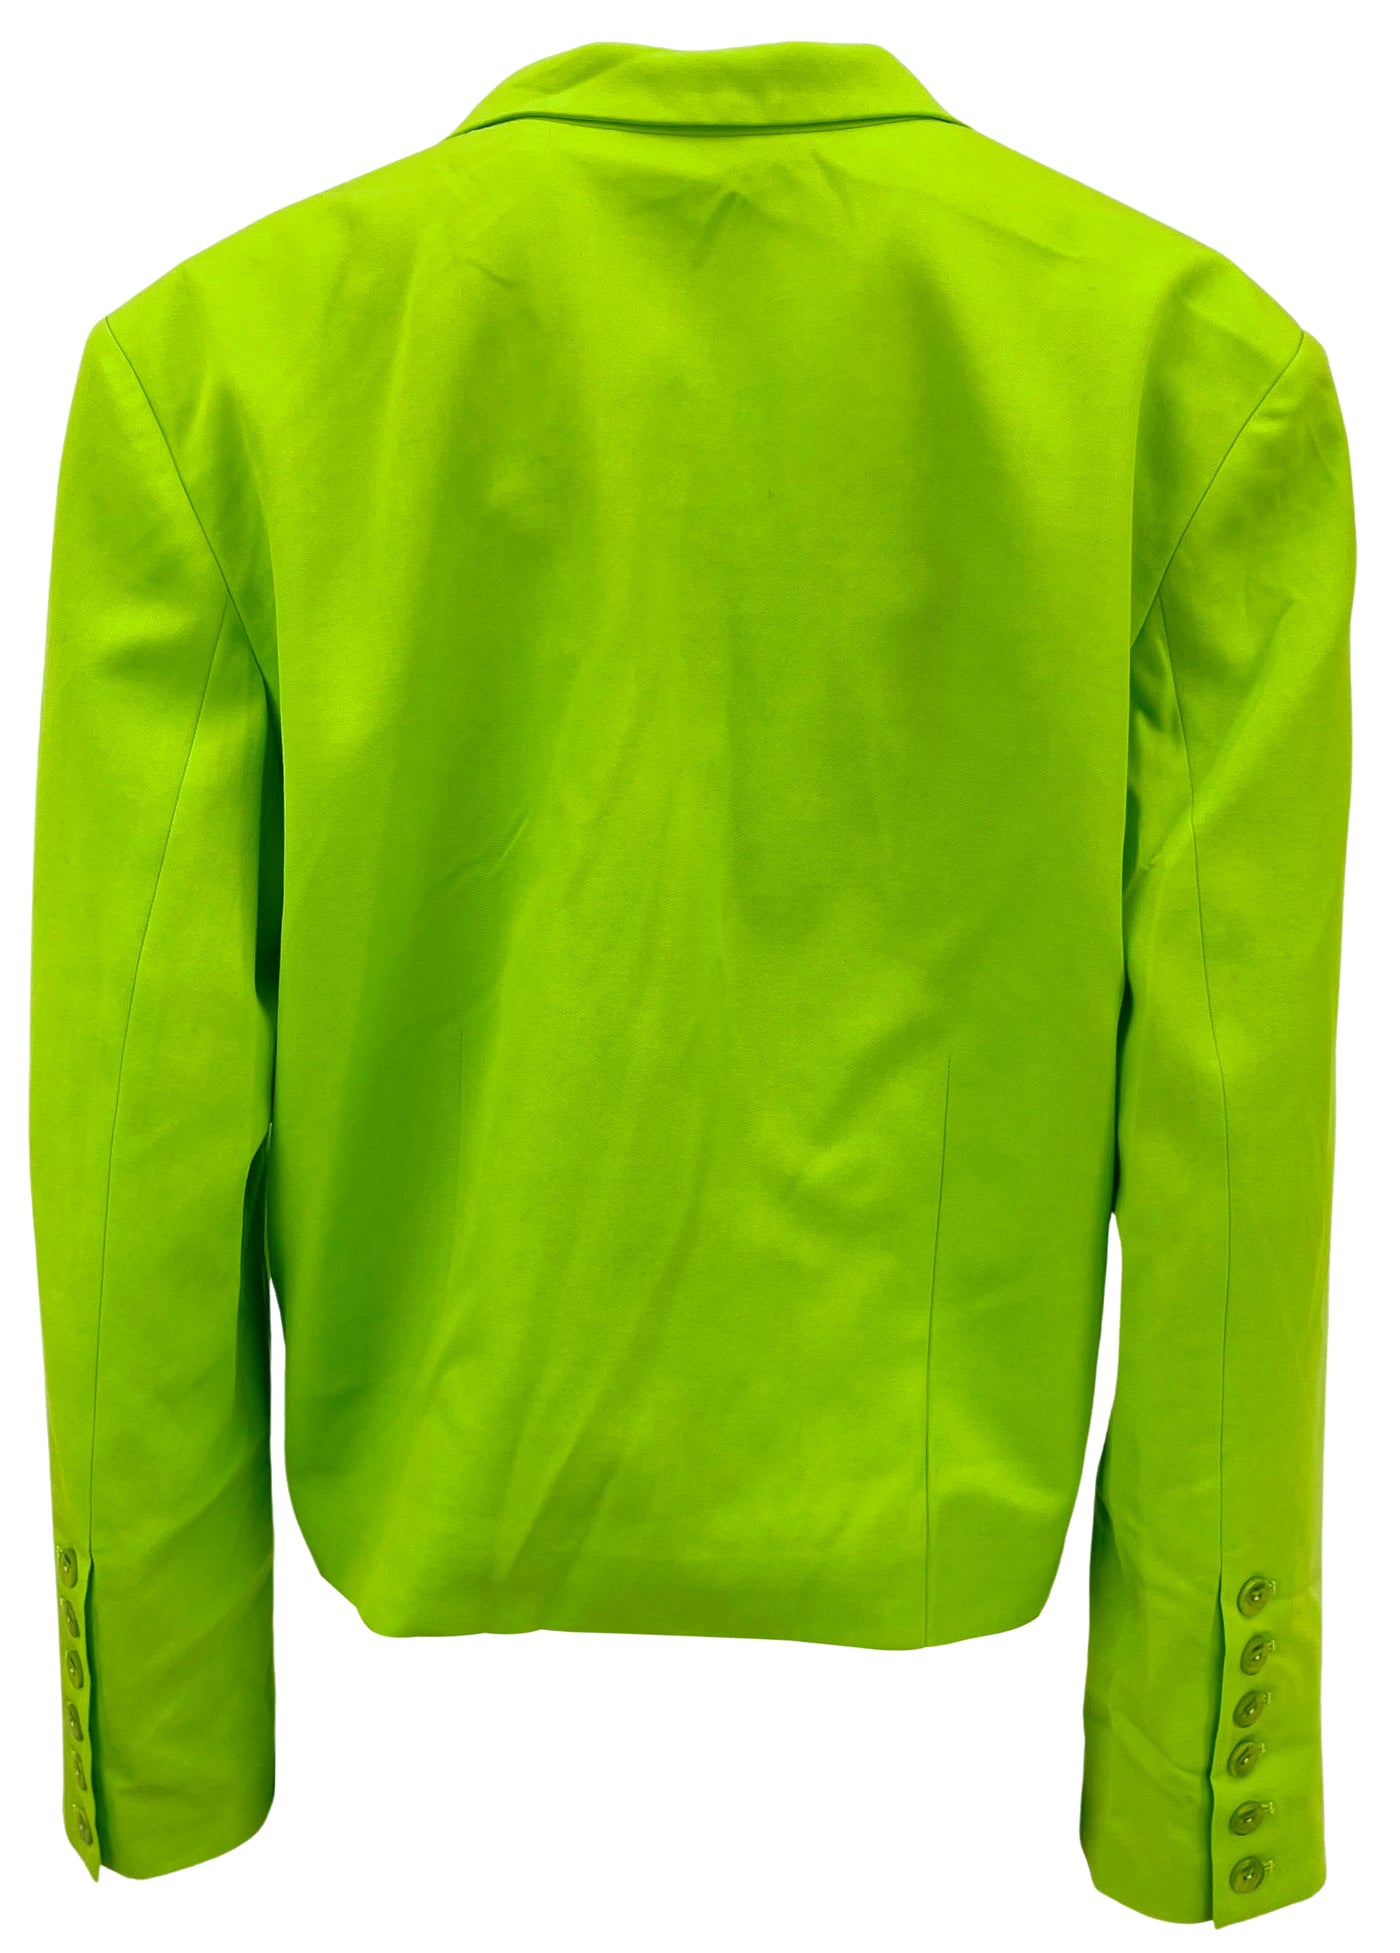 LAPOINTE Boxy Blazer in Neon Green - Discounts on LaPointe at UAL